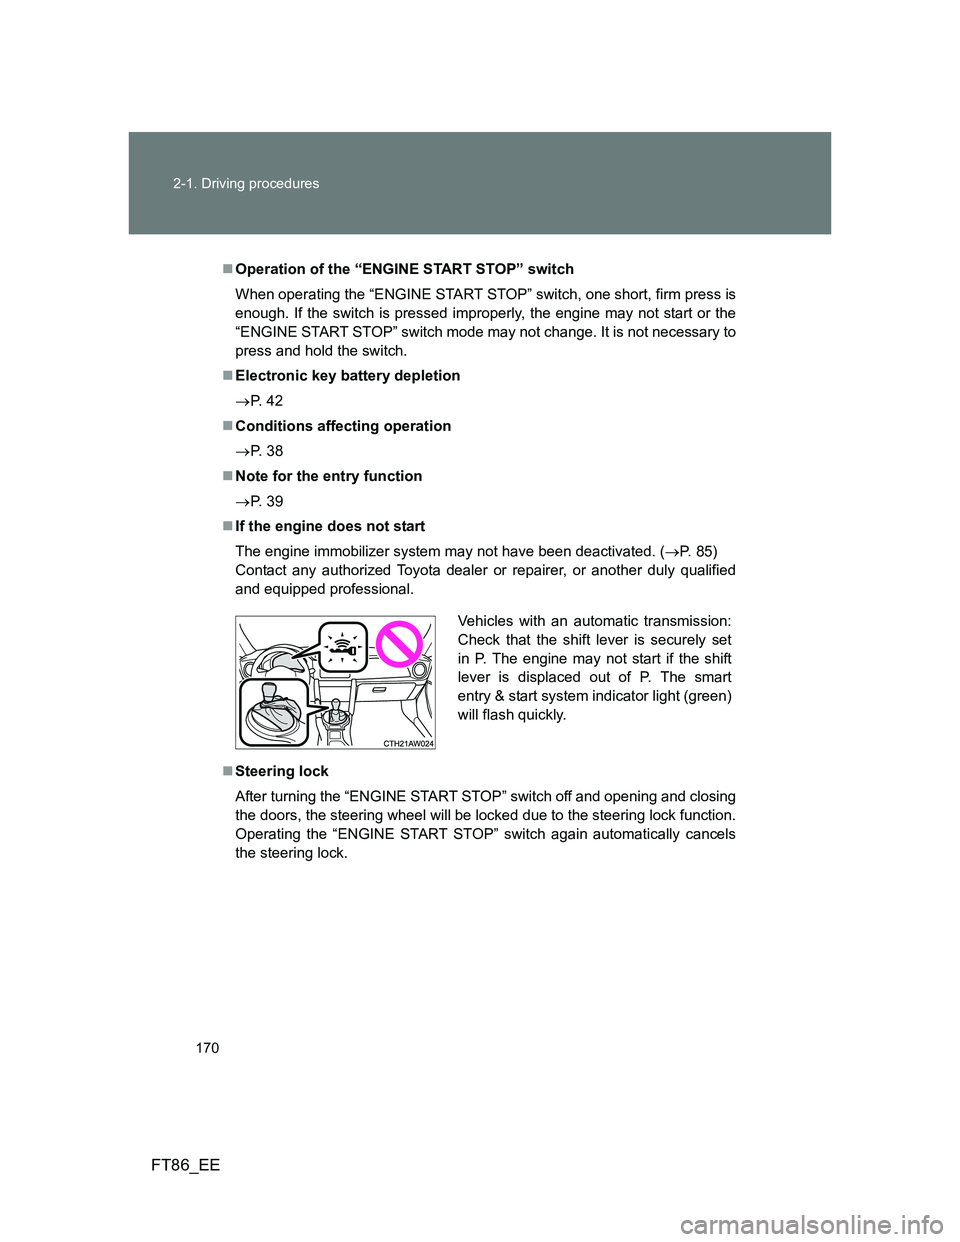 TOYOTA GT86 2013  Owners Manual (in English) 170 2-1. Driving procedures
FT86_EE
Operation of the “ENGINE START STOP” switch
When operating the “ENGINE START STOP” switch, one short, firm press is
enough. If the switch is pressed impr